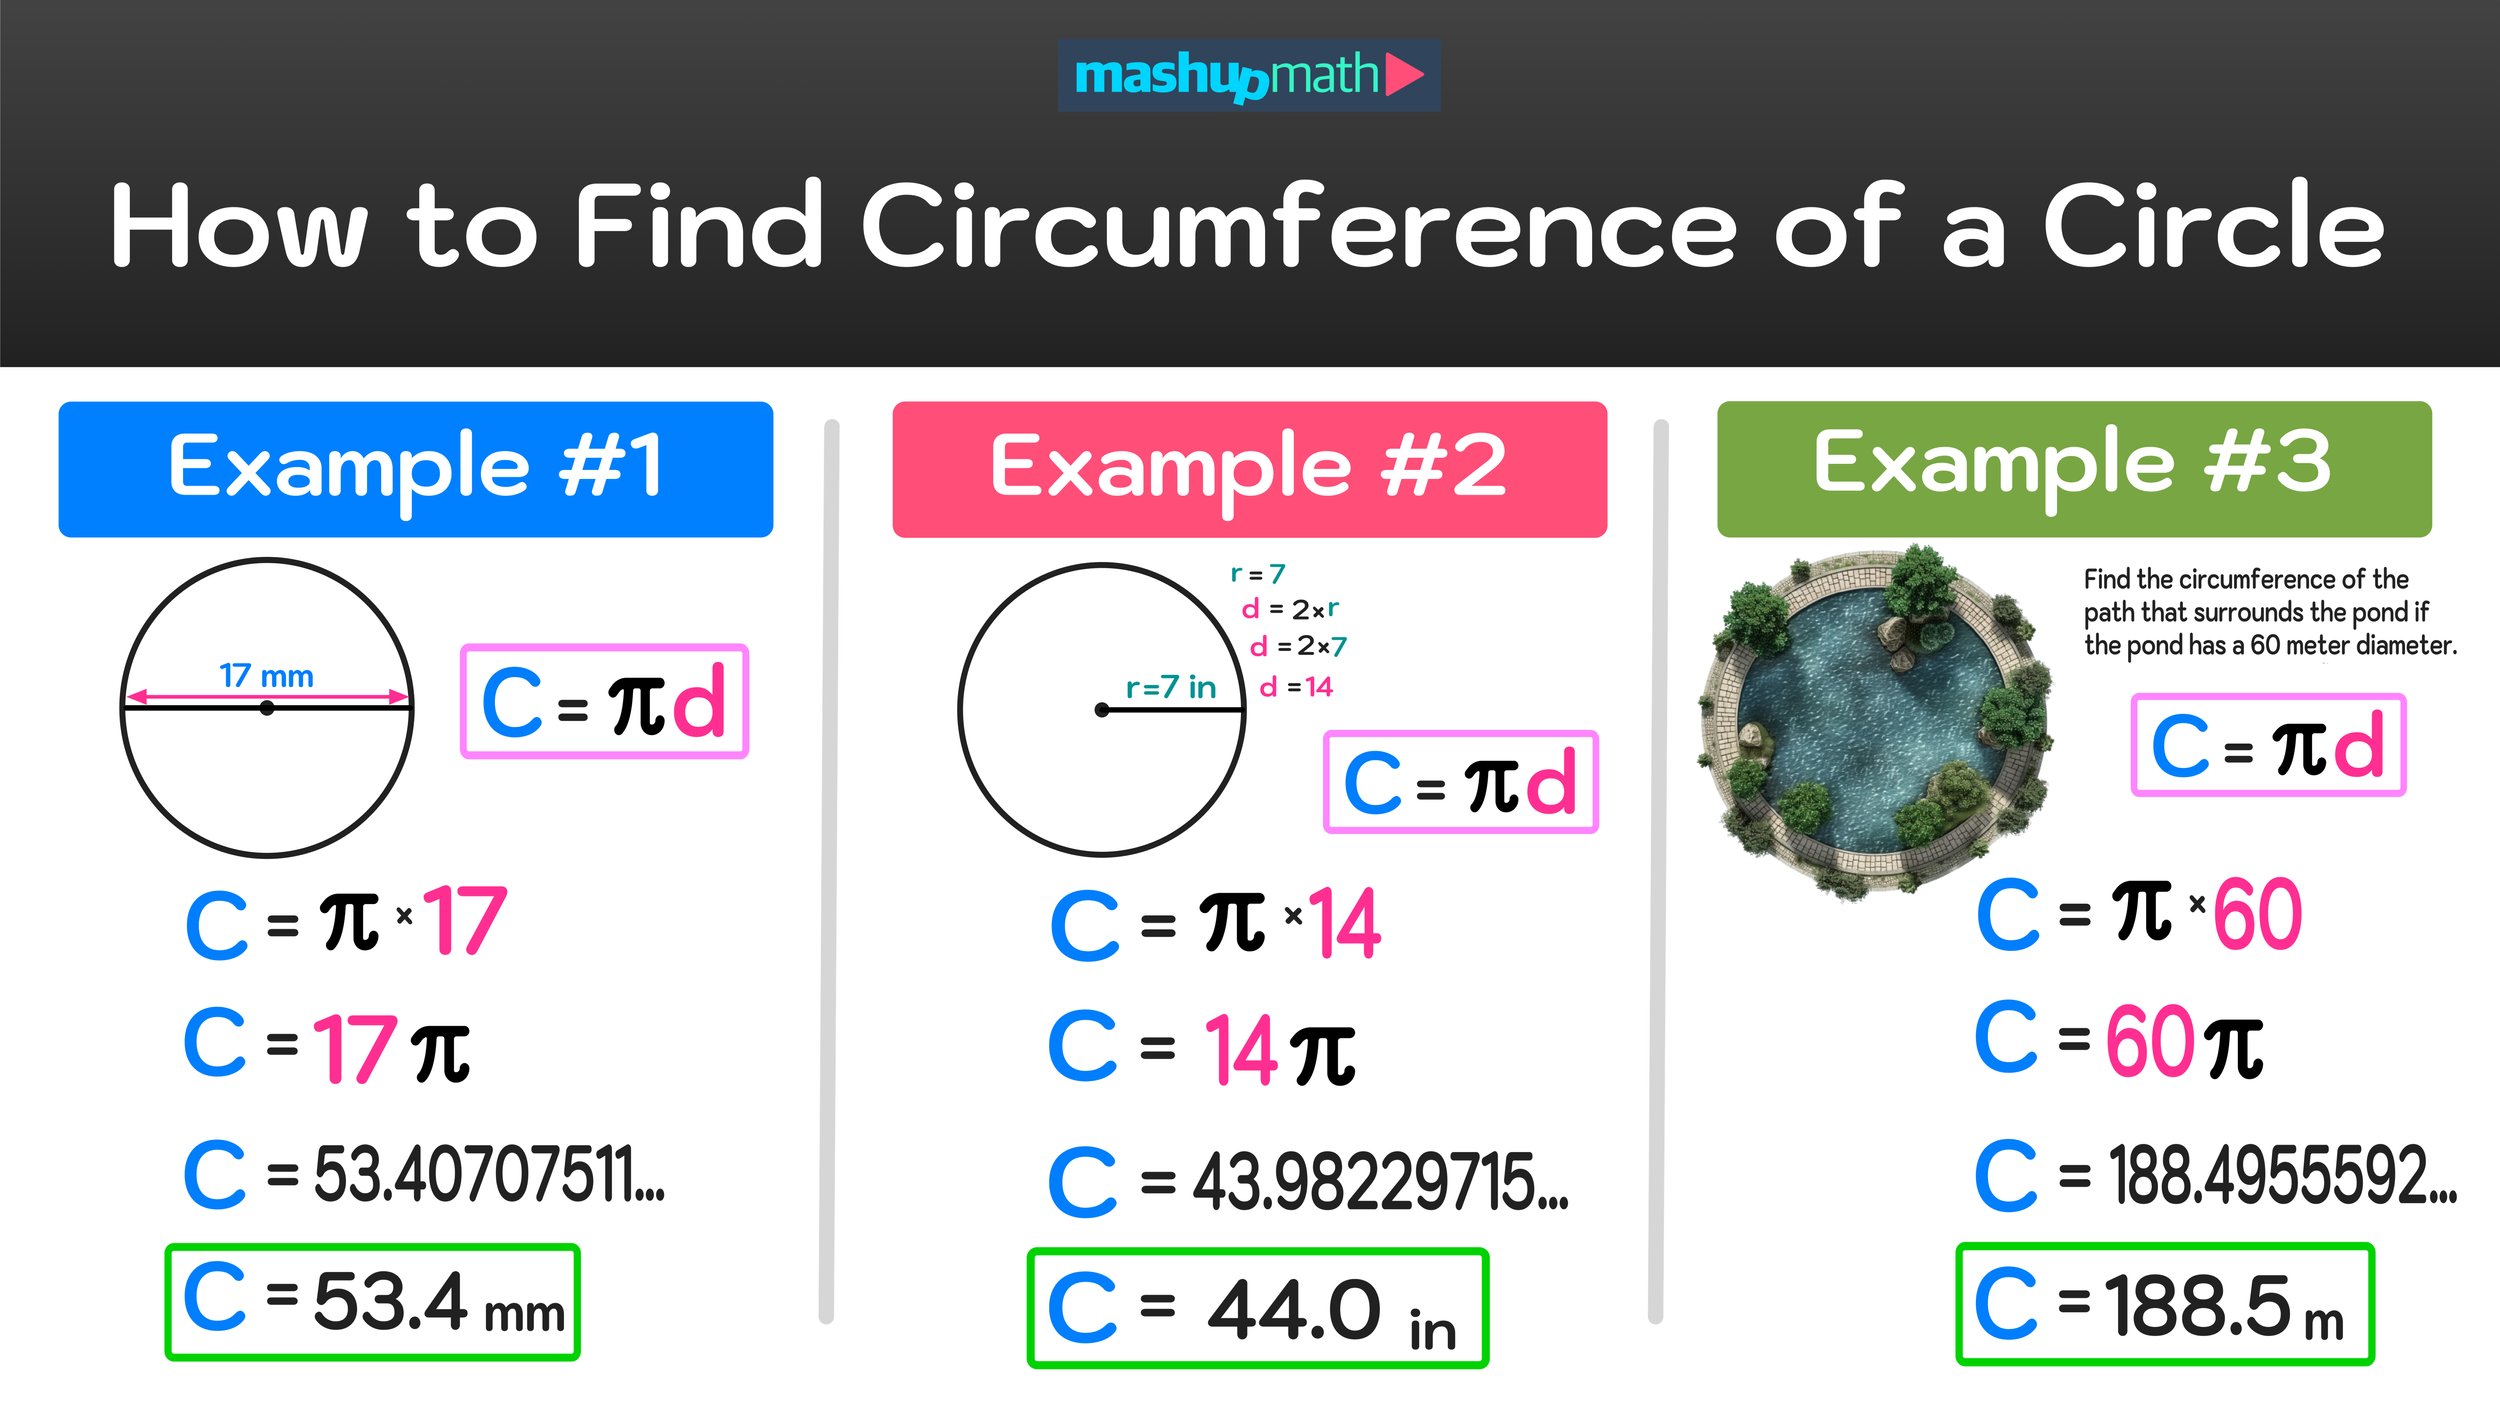 How to Find the Circumference of a Circle in 3 Easy Steps